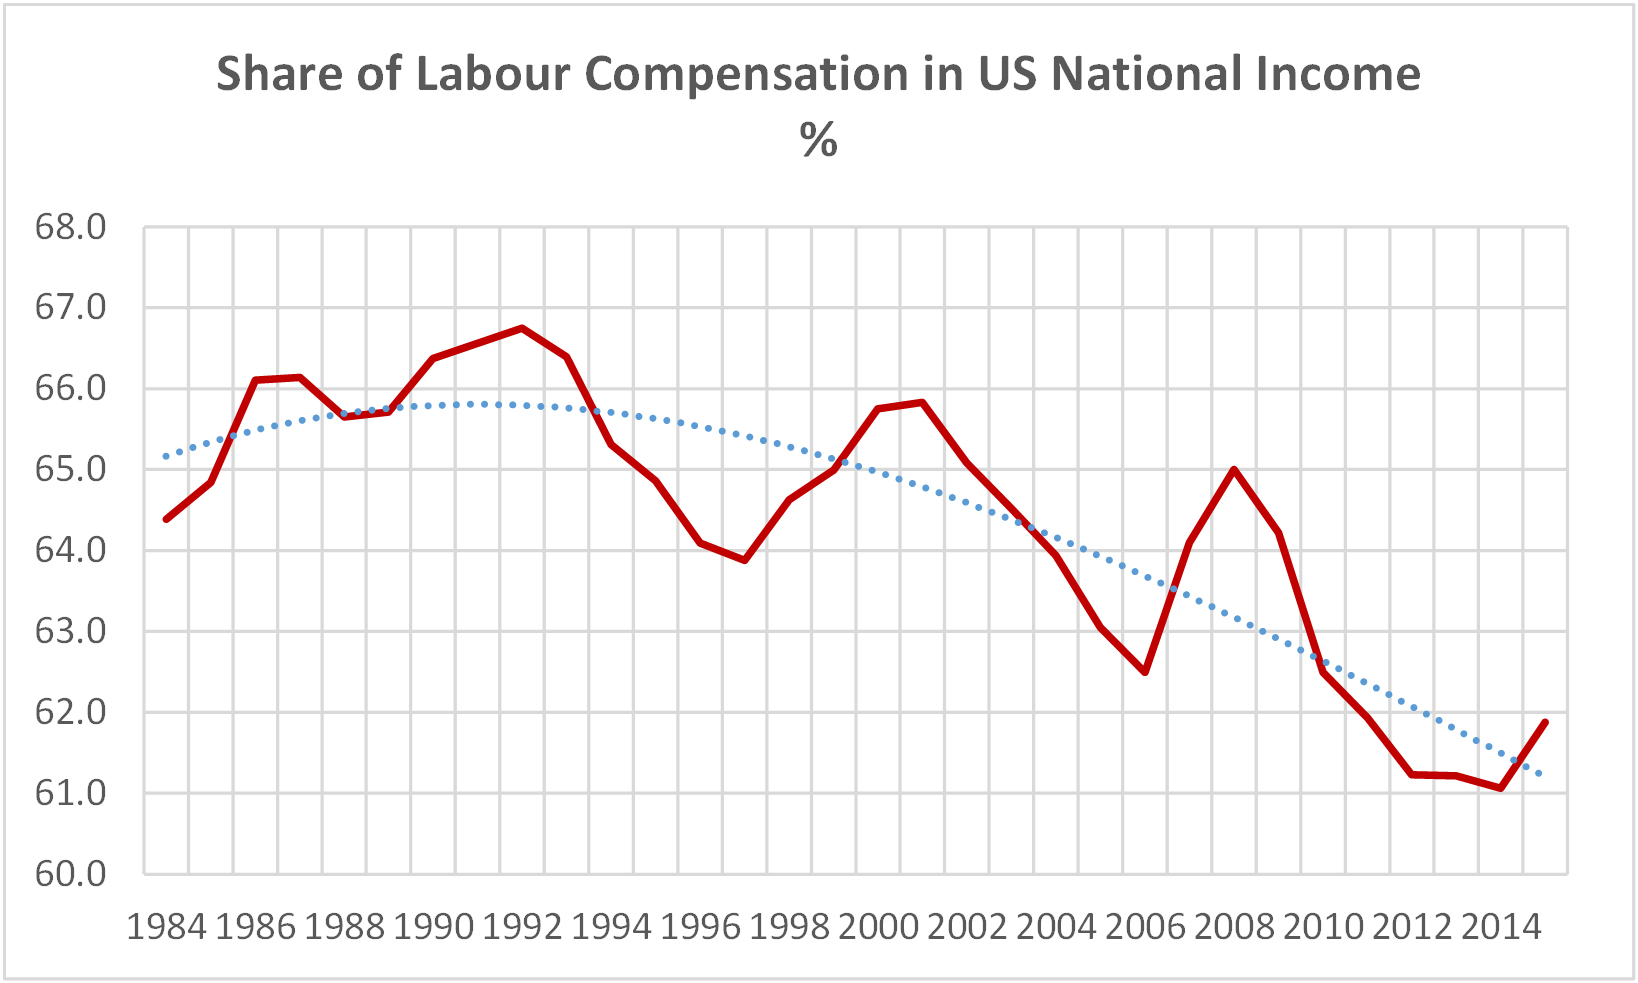 Chart 2.2 - Share of Labour Compensation in US National Income